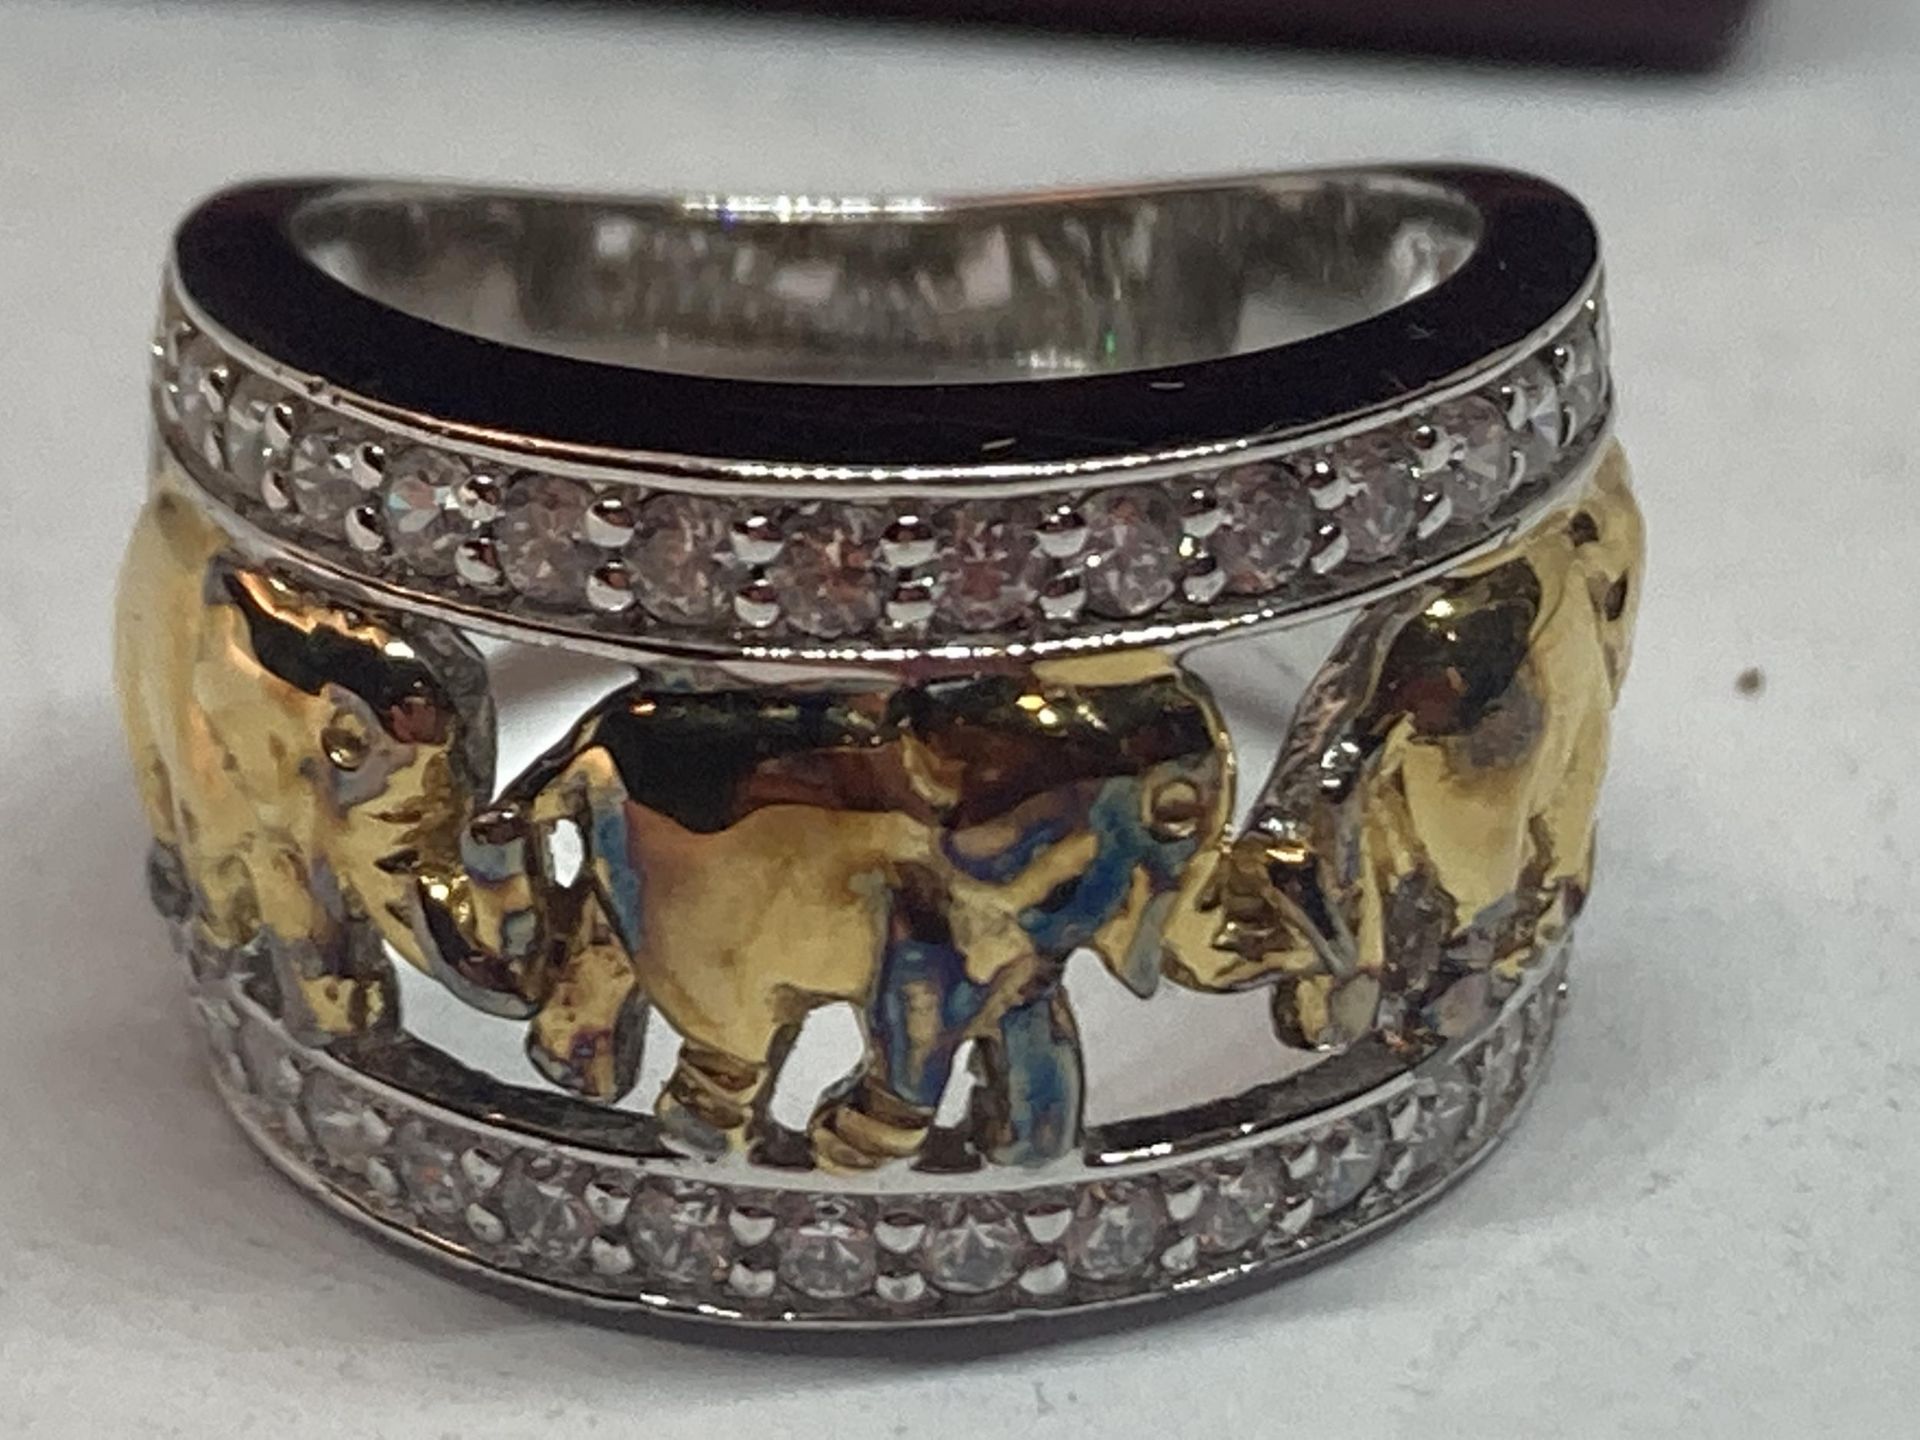 A GOLD ON SILVER ELEPHANT RING IN A PRESENTATION BOX - Image 2 of 4